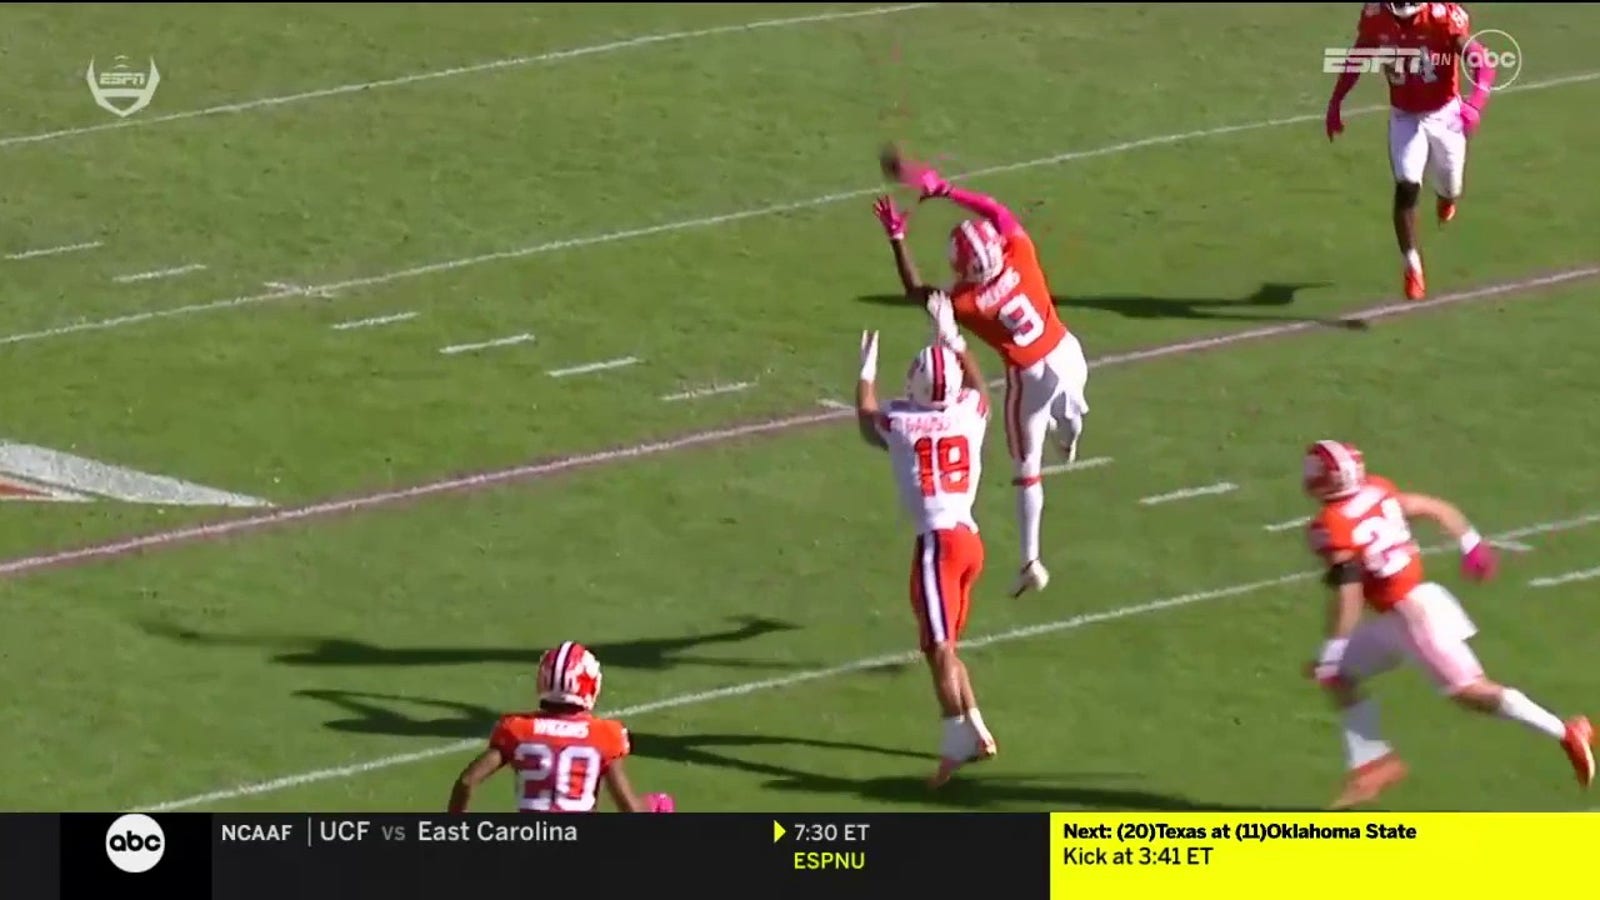 Clemson's defense came up clutch with a game-ending interception